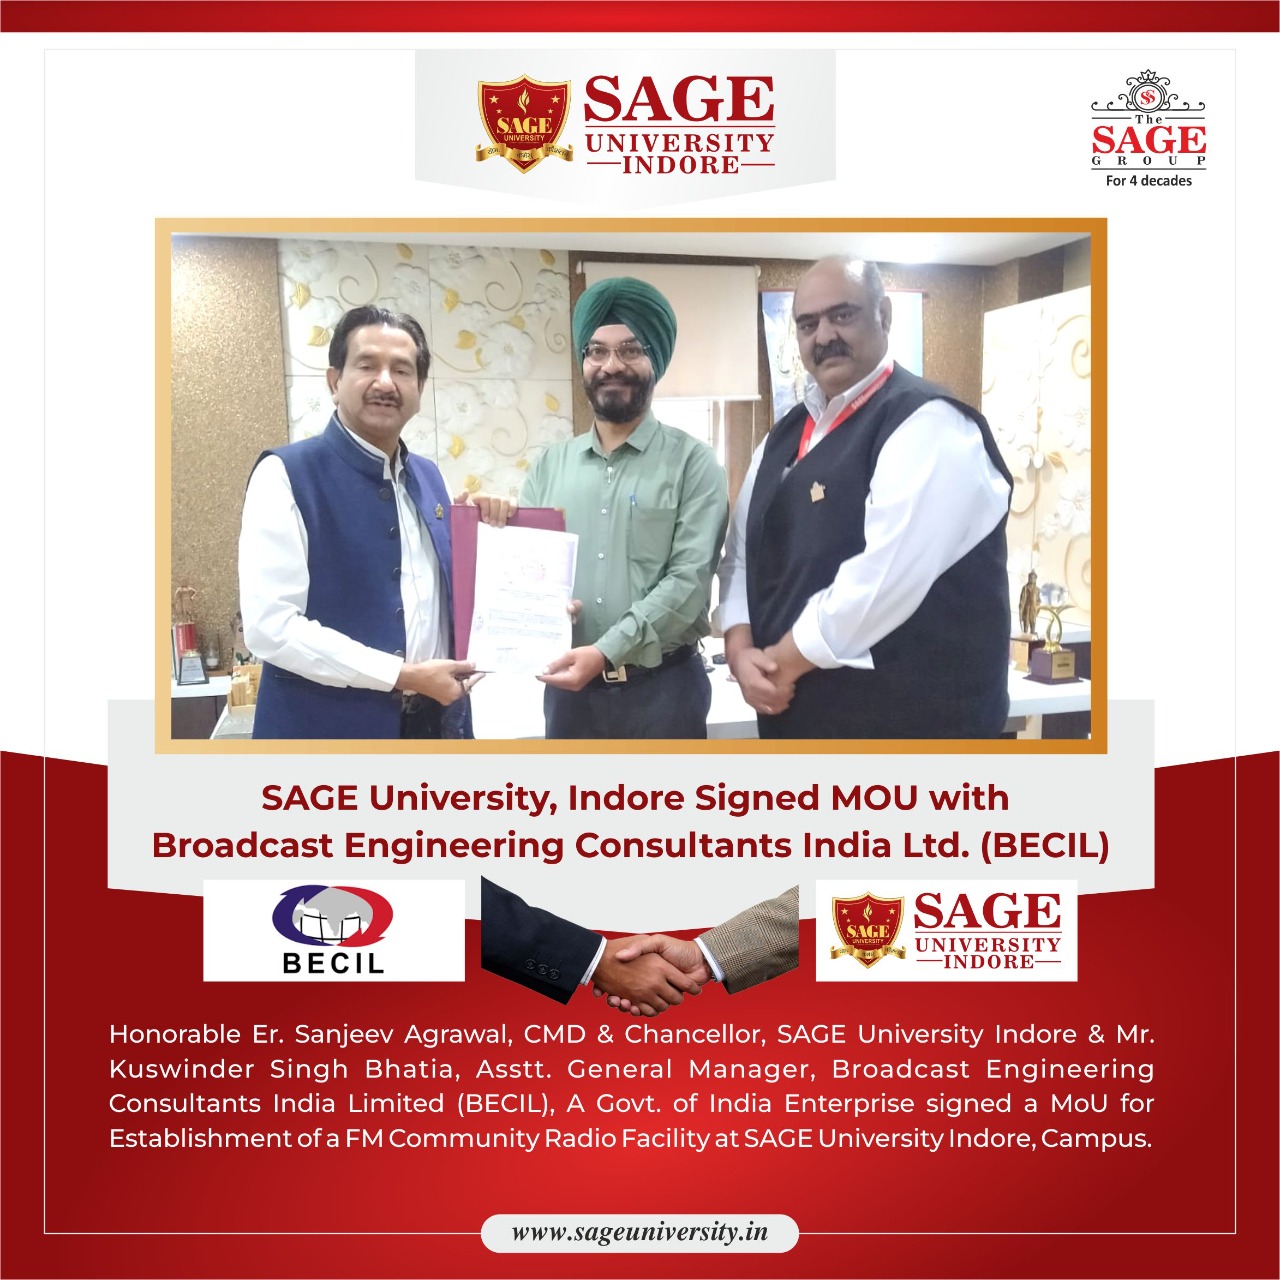 SAGE University Indore Signed MOU With Broadcast Engineering Consultants India Limited (BECIL)